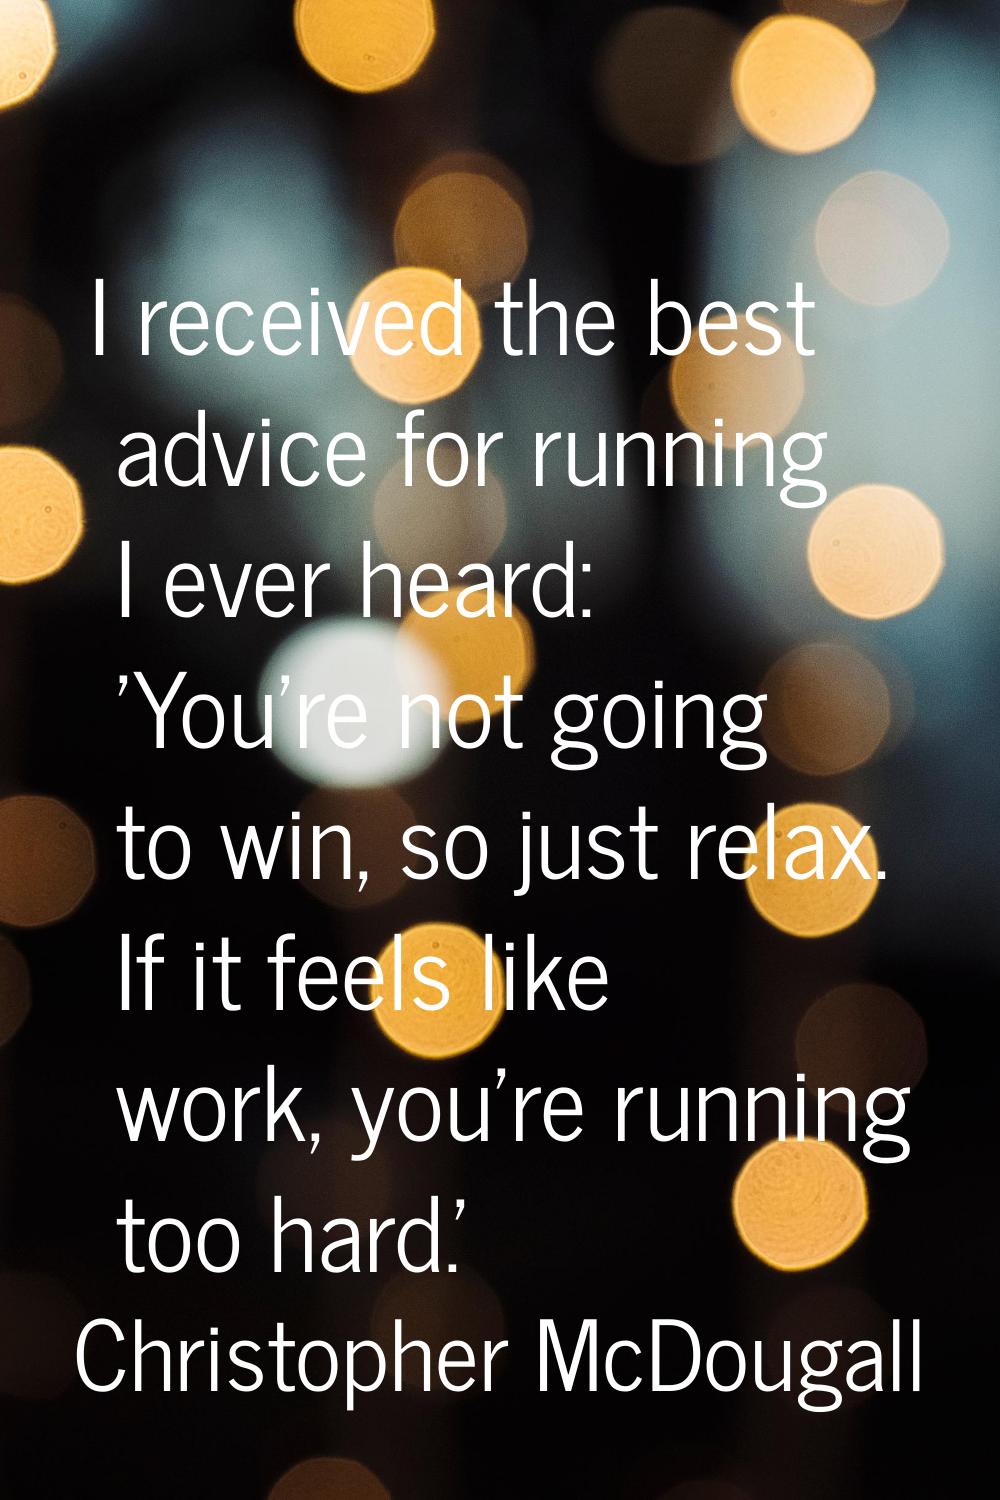 I received the best advice for running I ever heard: 'You're not going to win, so just relax. If it